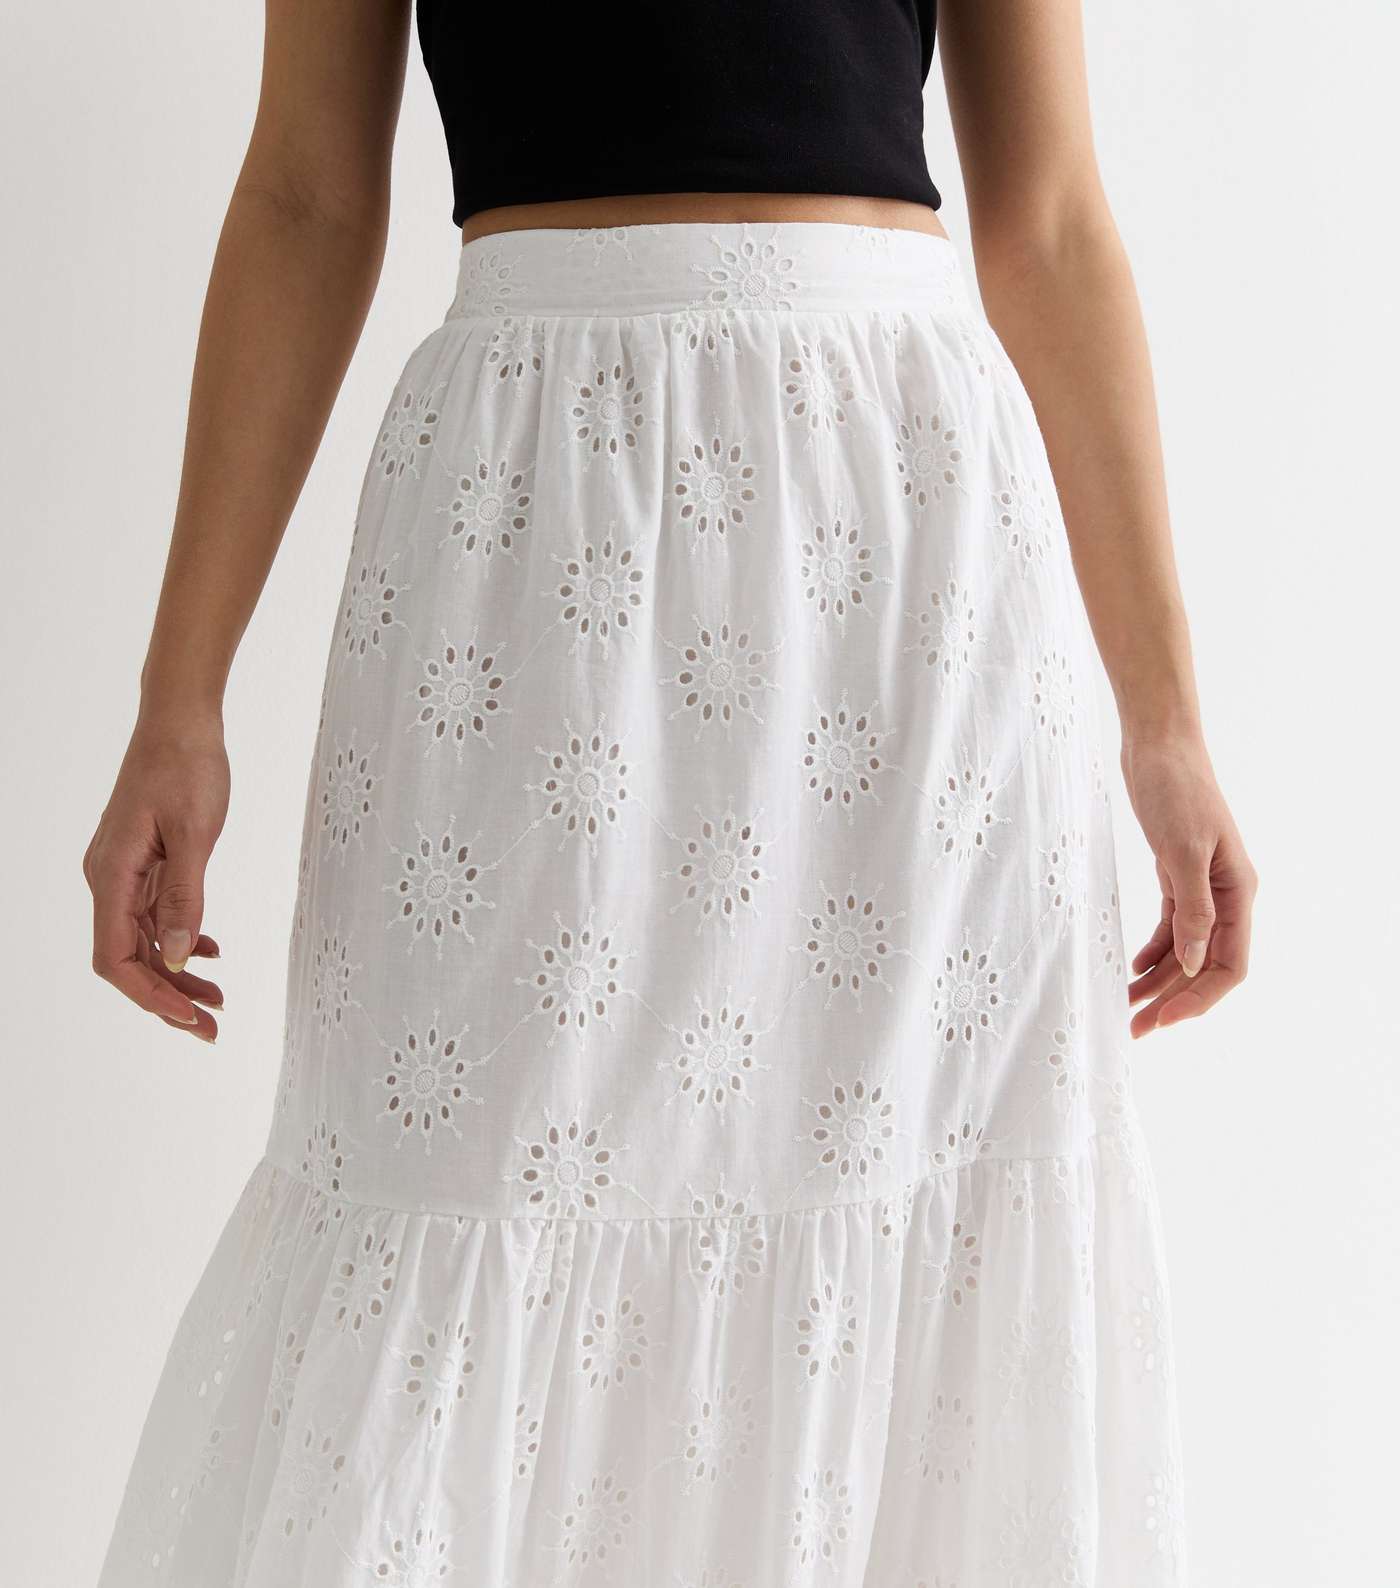 Gini London White Tiered Lace Embroidered Maxi Skirt Image 2